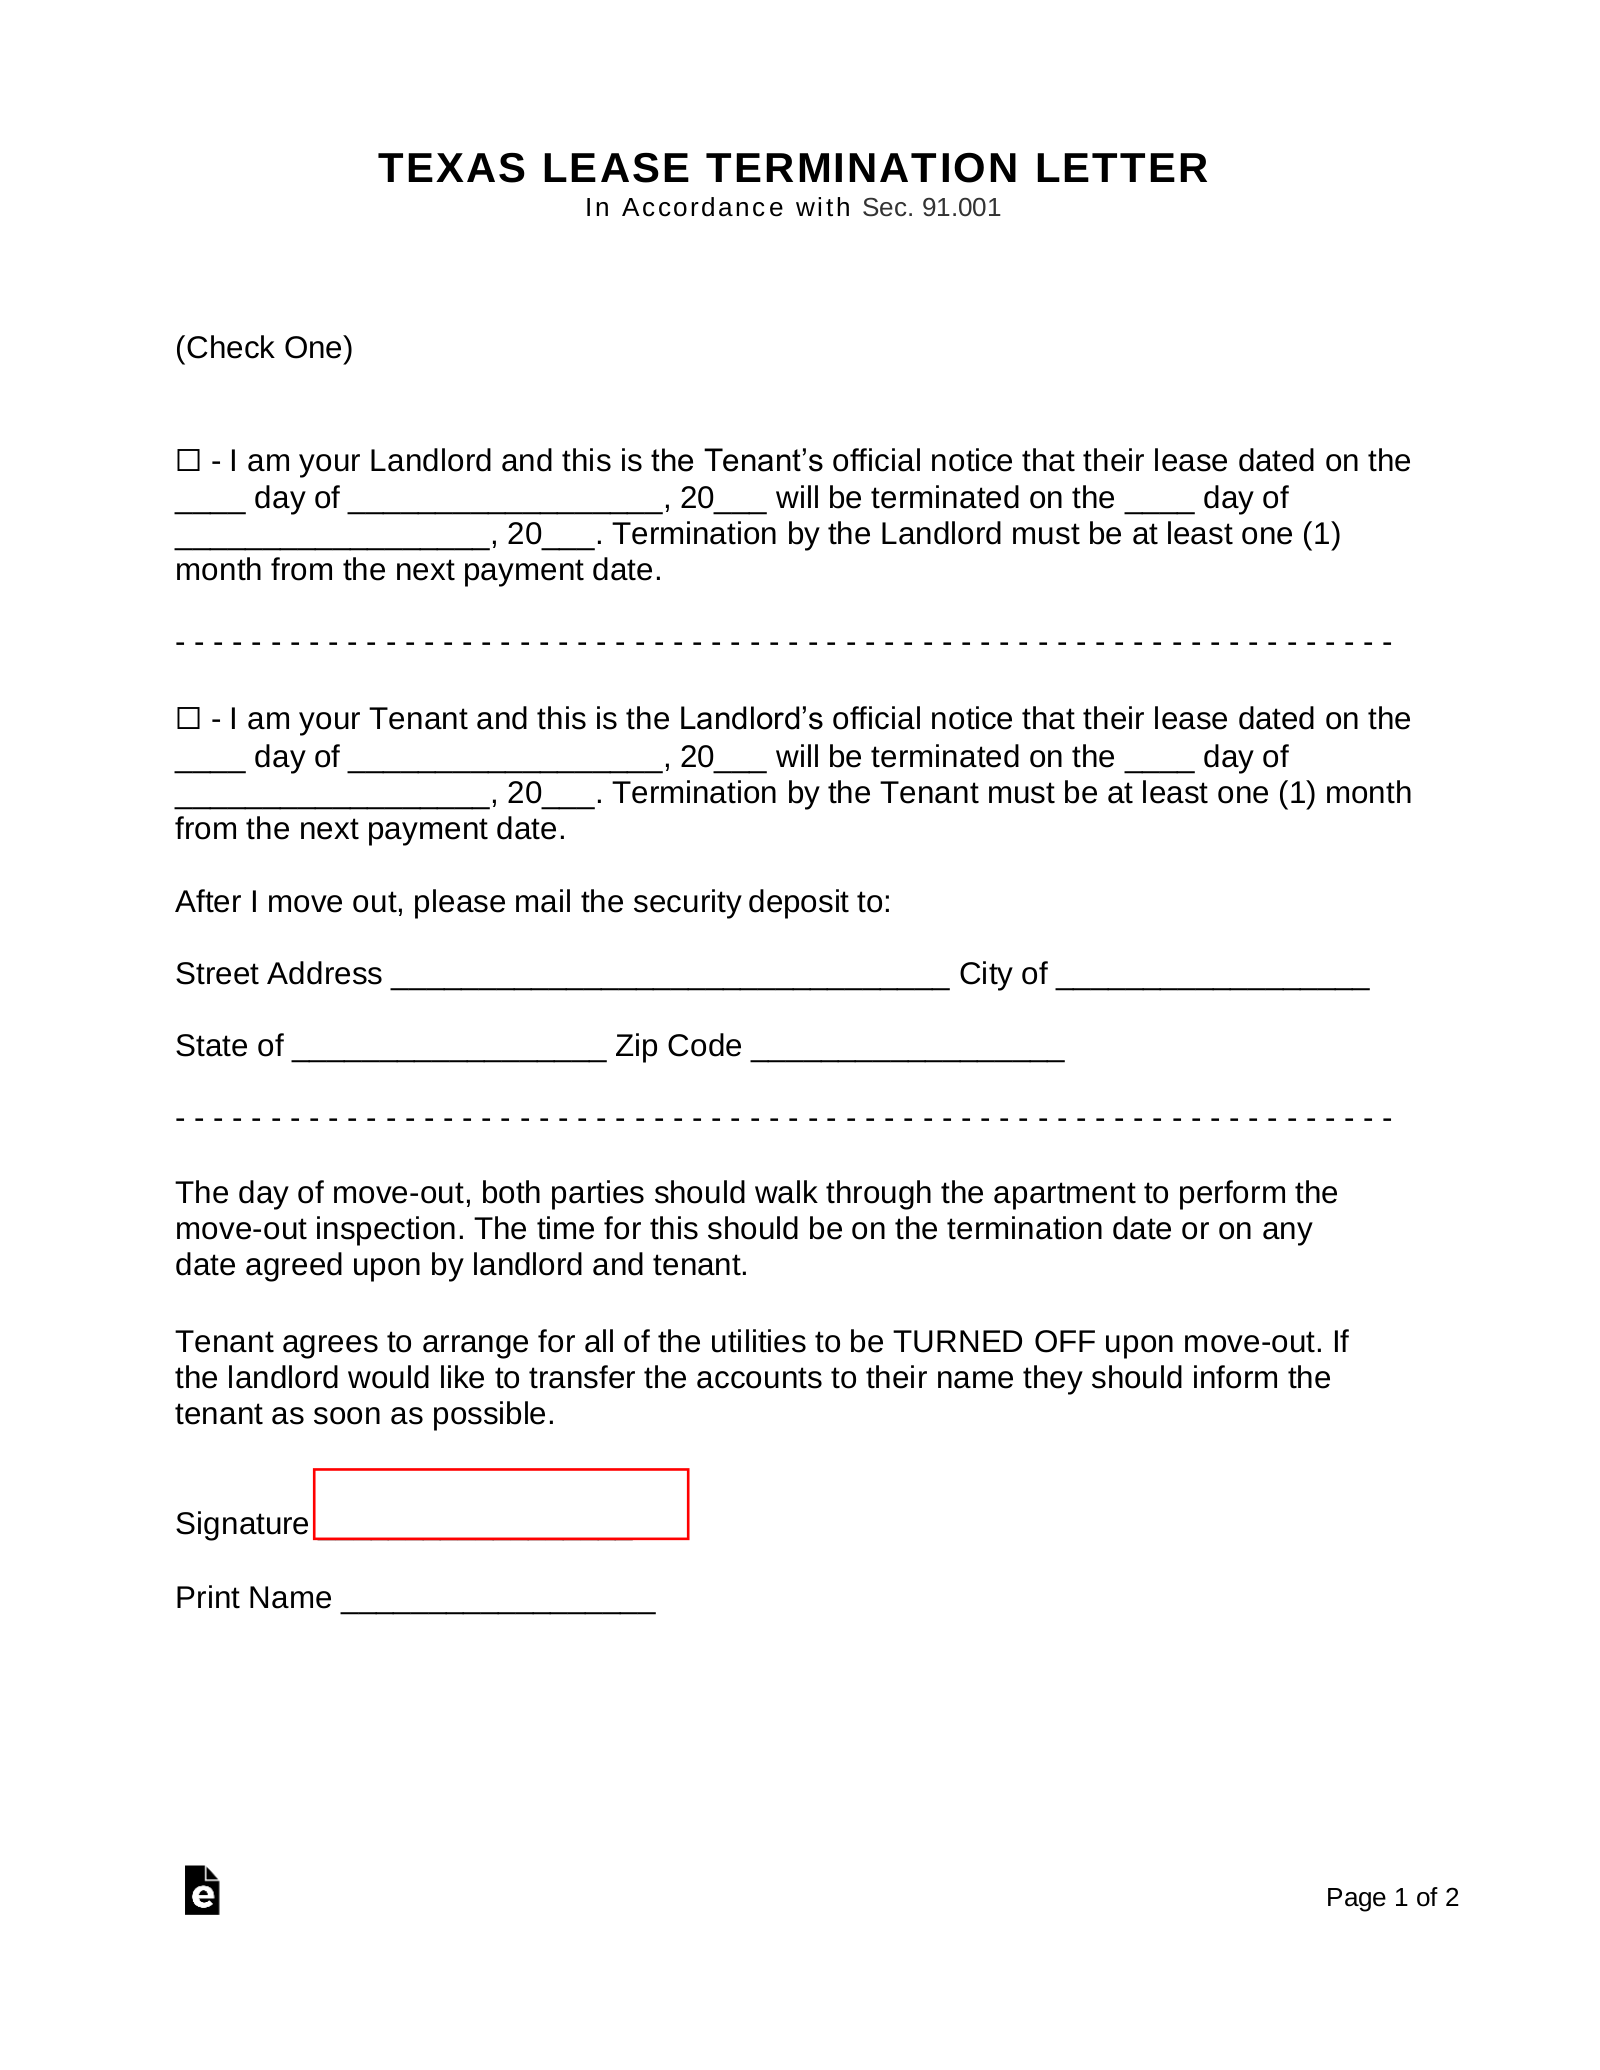 Landlord Letter To Tenant Move Out from eforms.com